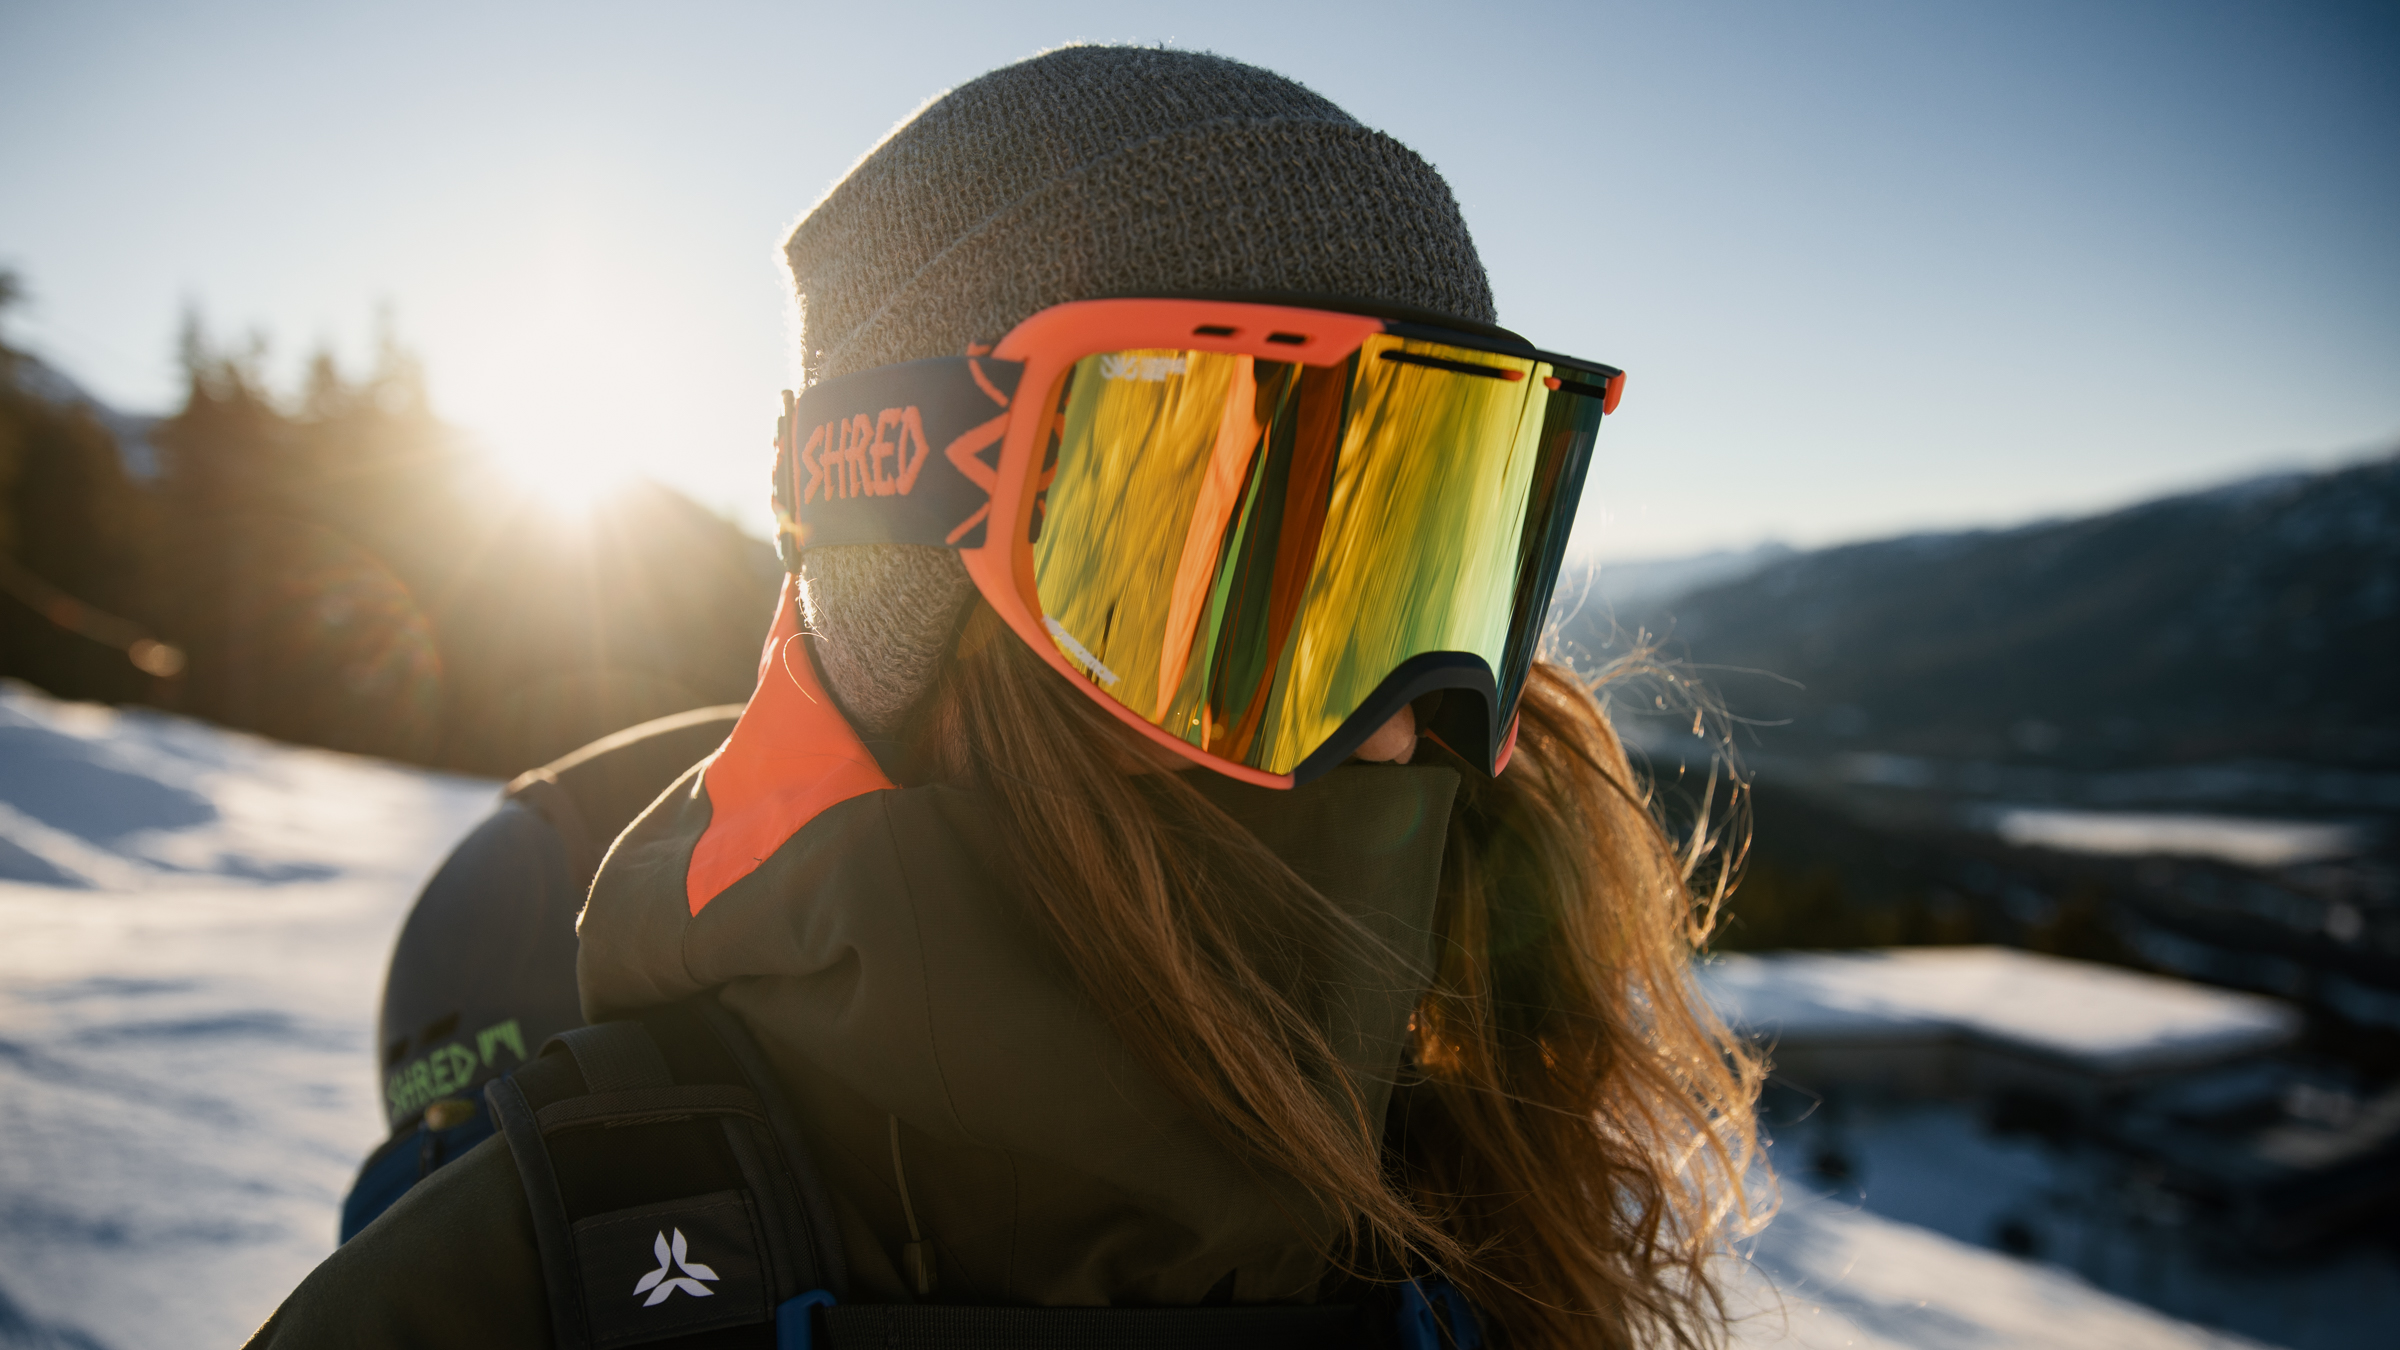 Marie-pier Préfontaine wearing Shred Goggles